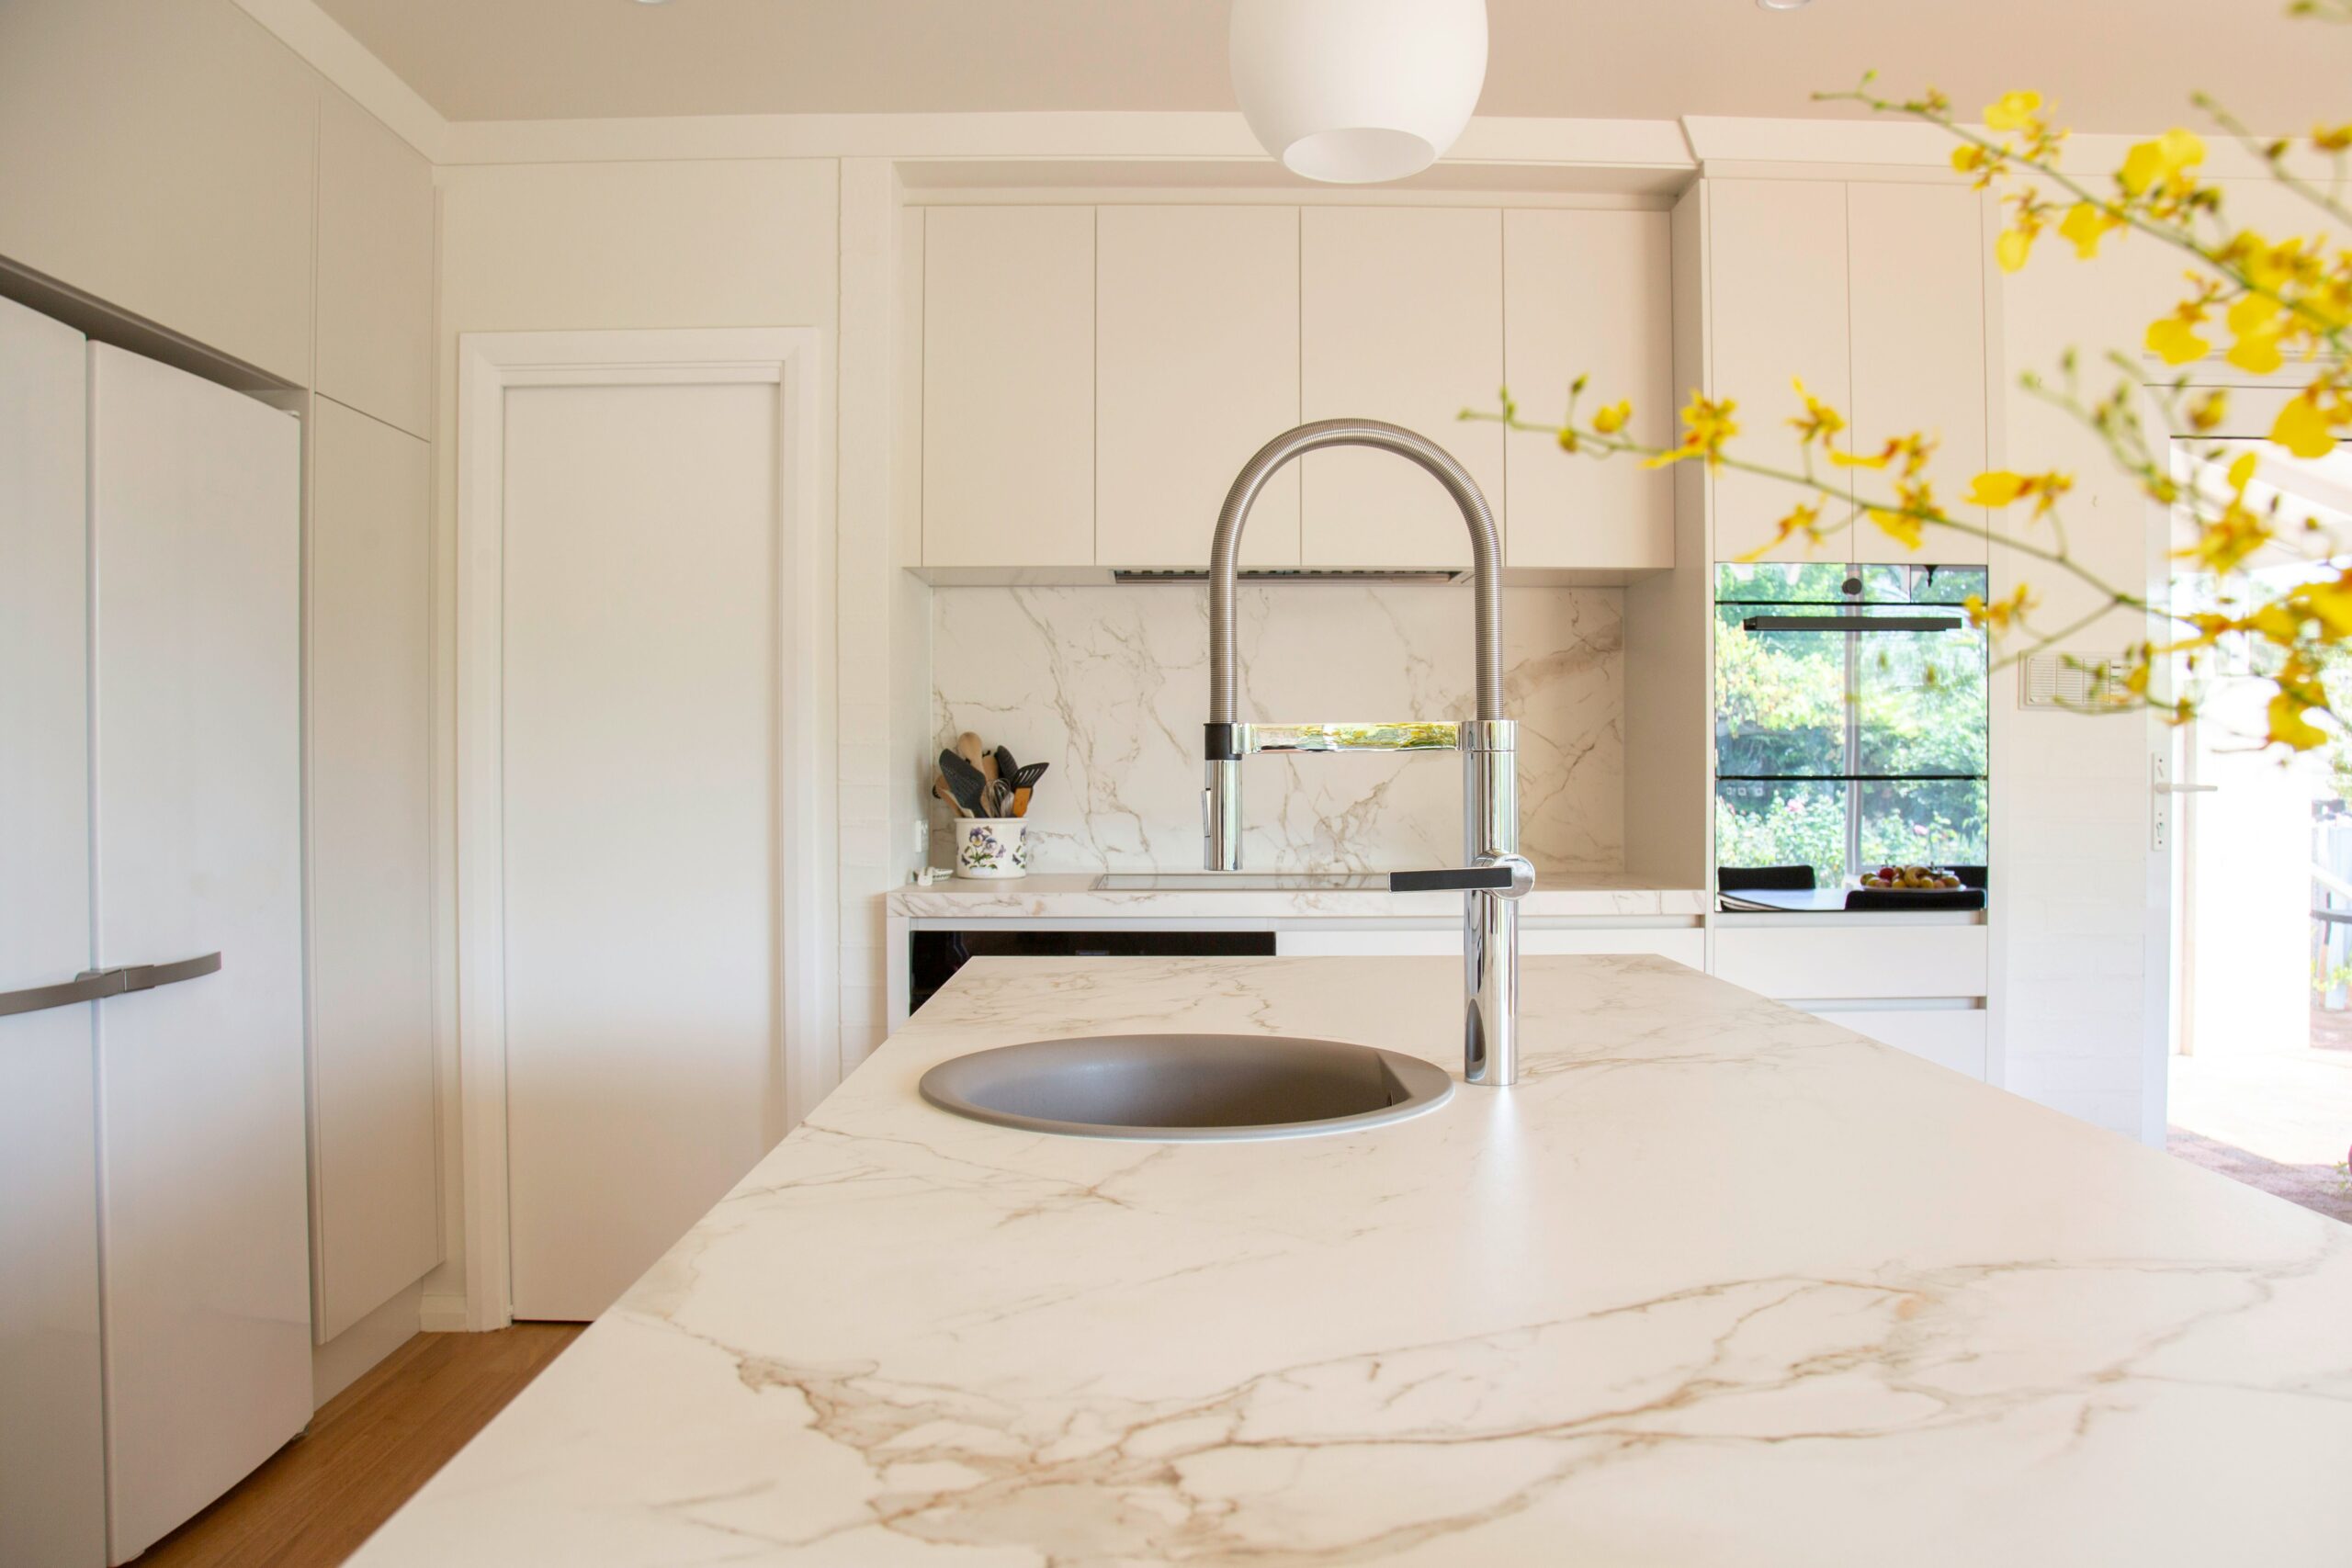 What Are the Differences Between Marble and Granite?